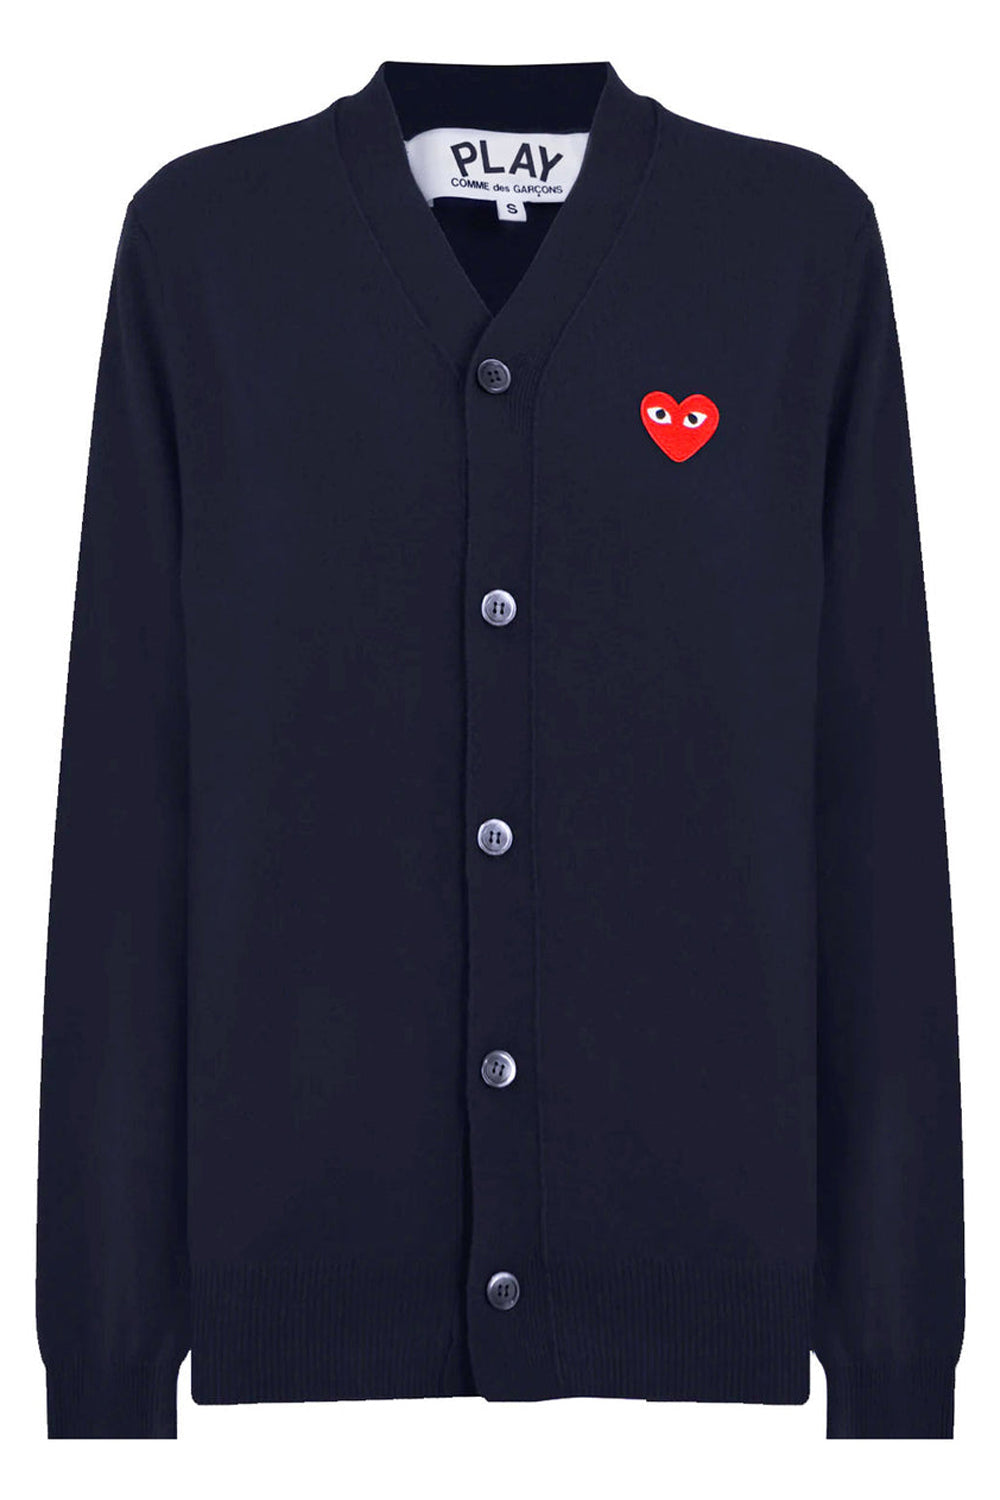 COMME DES GARCONS PLAY RTW PLAY MENS V-NECK SINGLE HEART CARDIGAN | NAVY/RED HEART